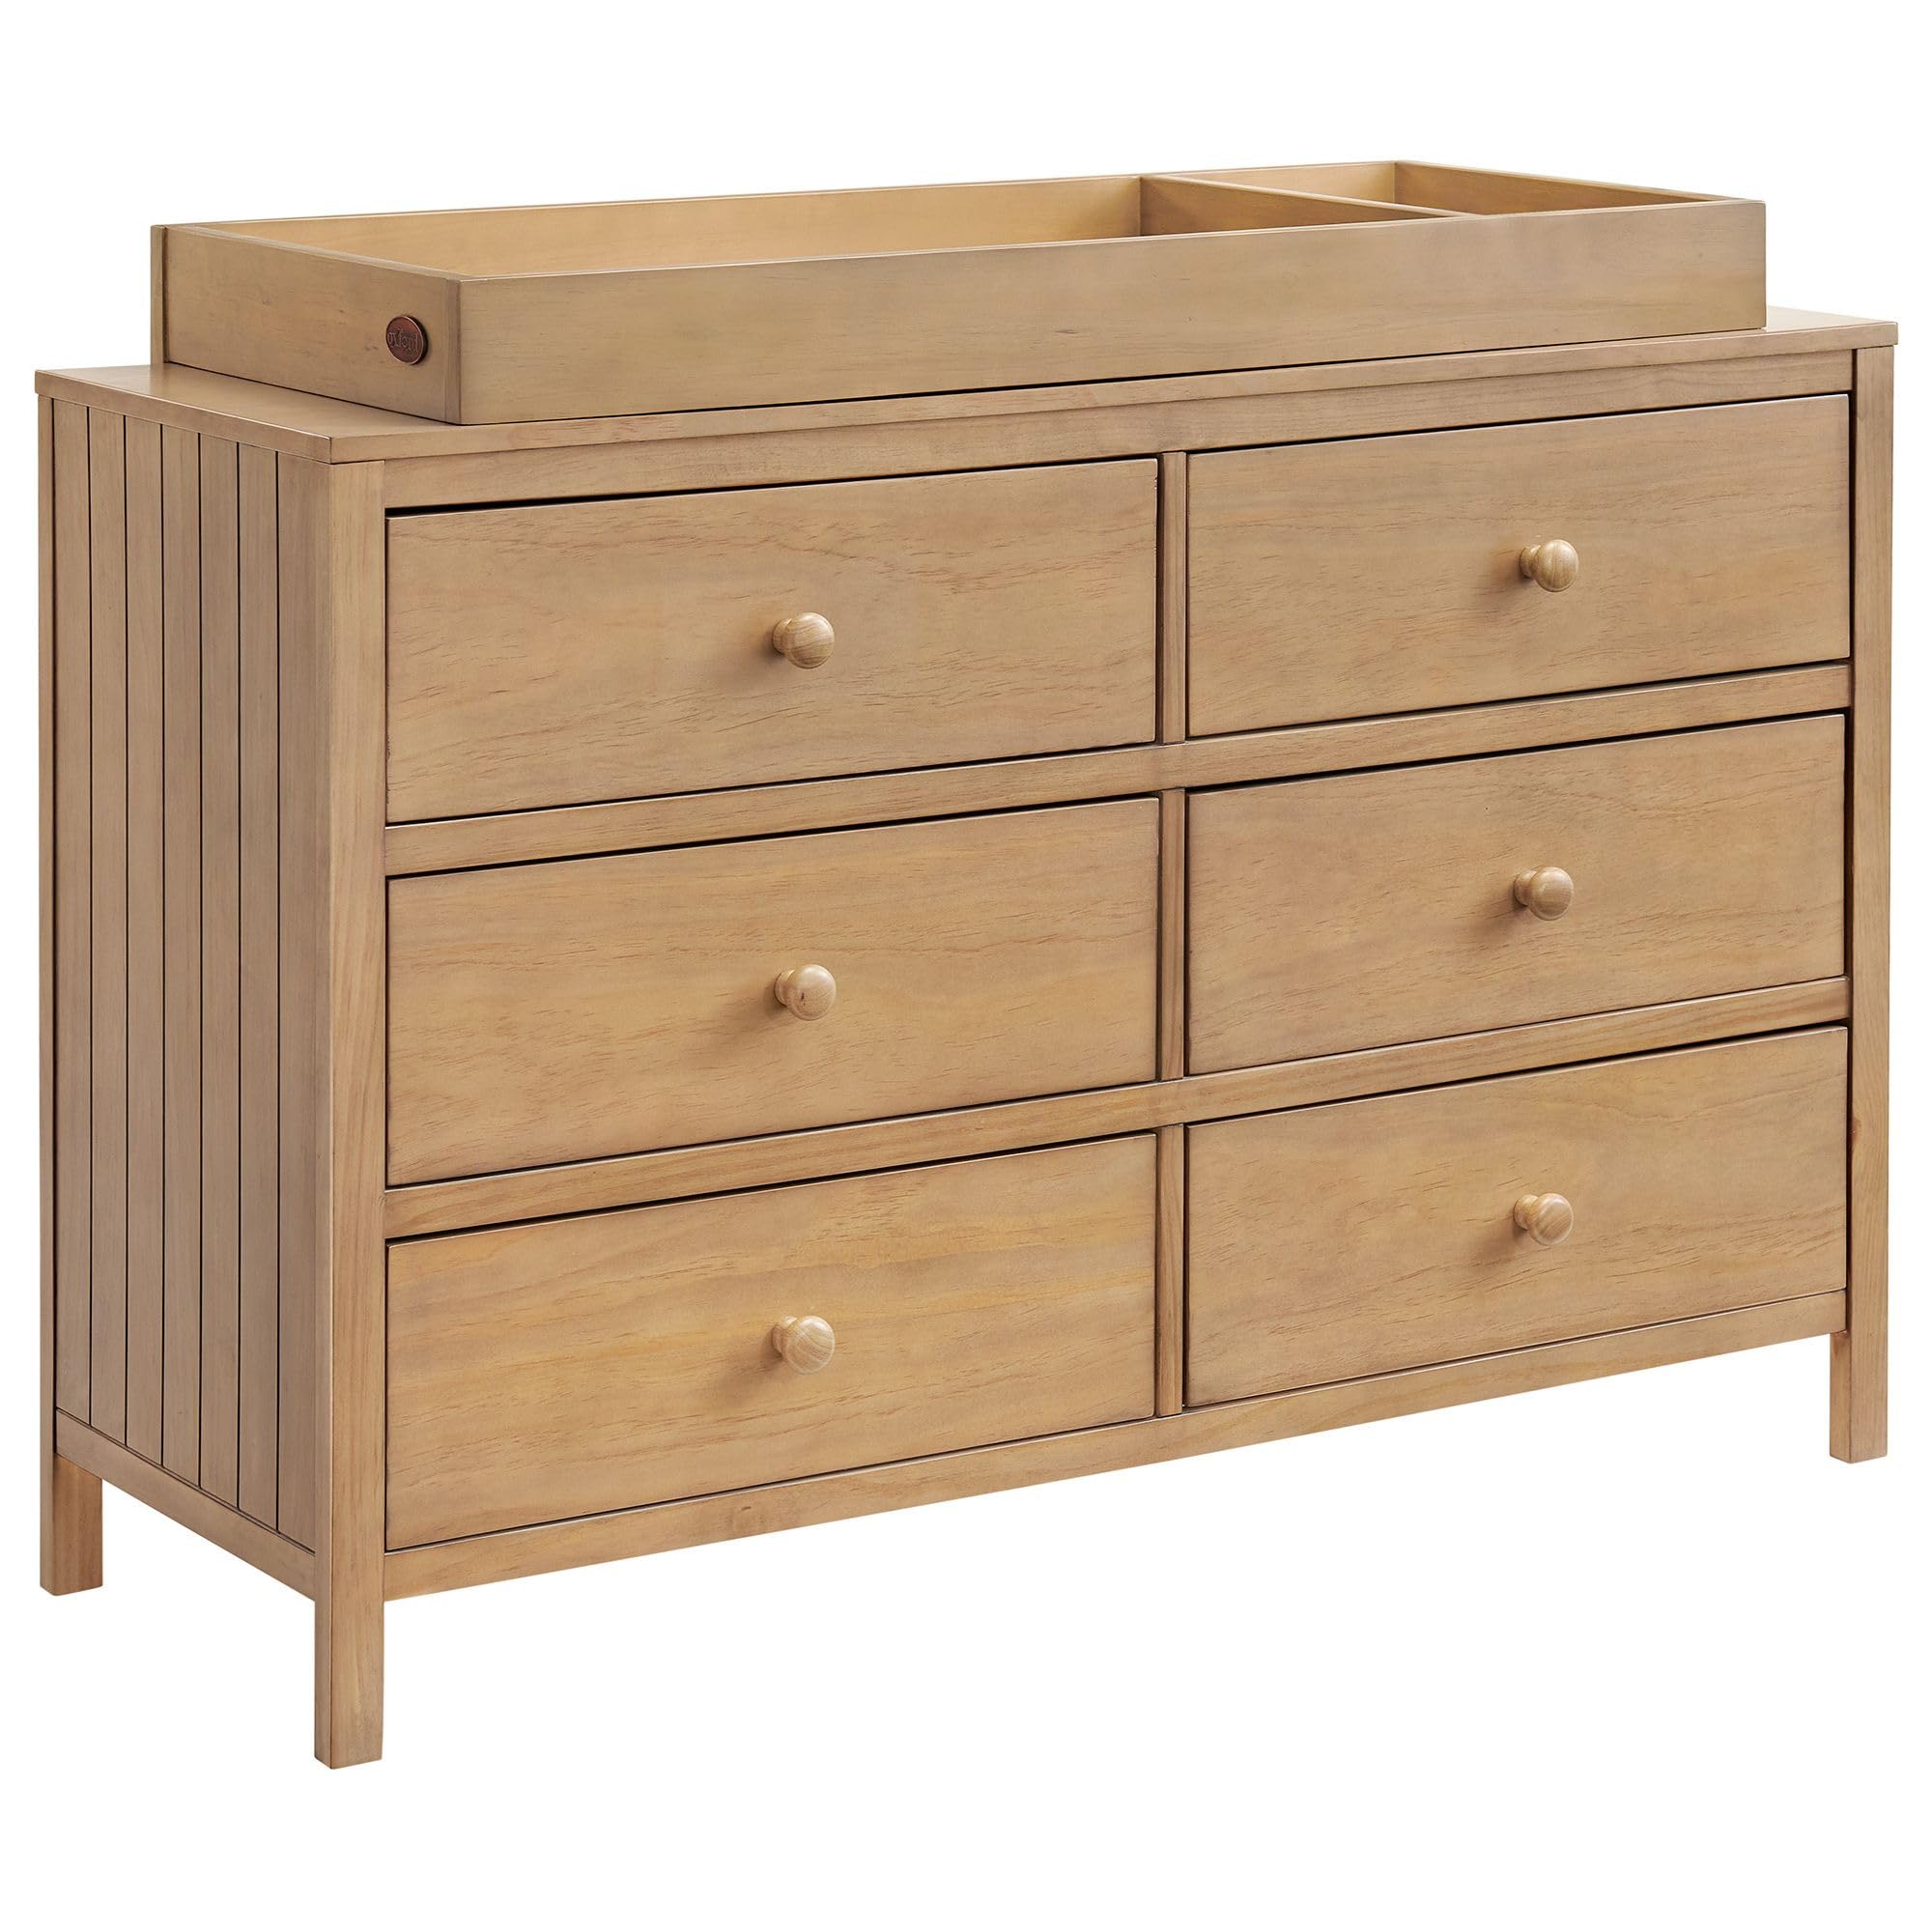 Oxford Baby Everlee Changing Topper for 6-Drawer Double Dresser, Honey Wood